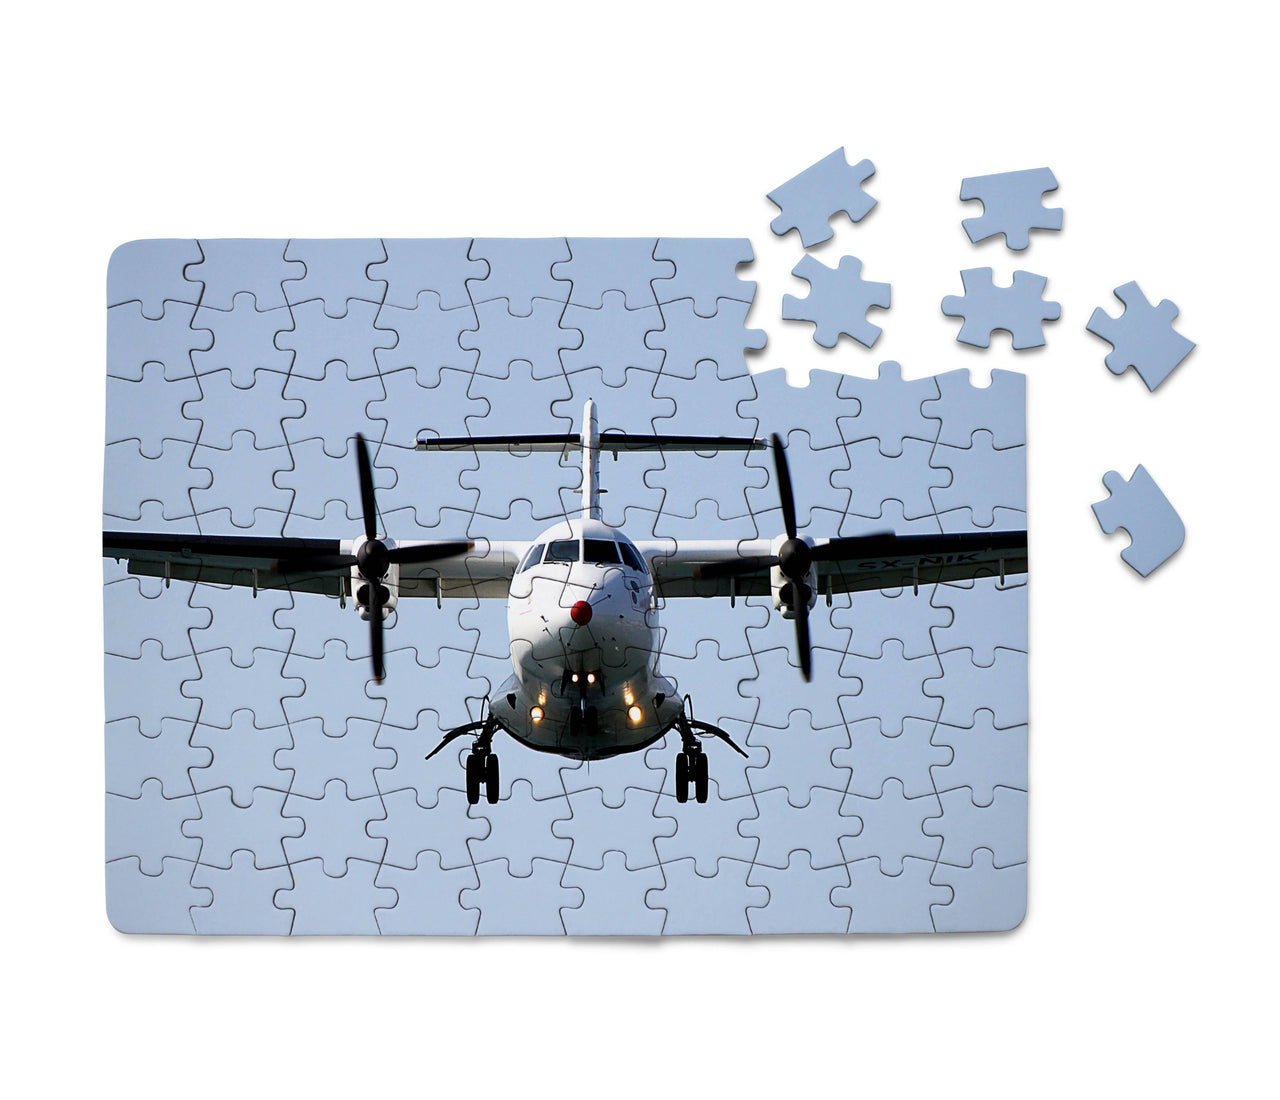 Face to Face with an ATR Printed Puzzles Aviation Shop 